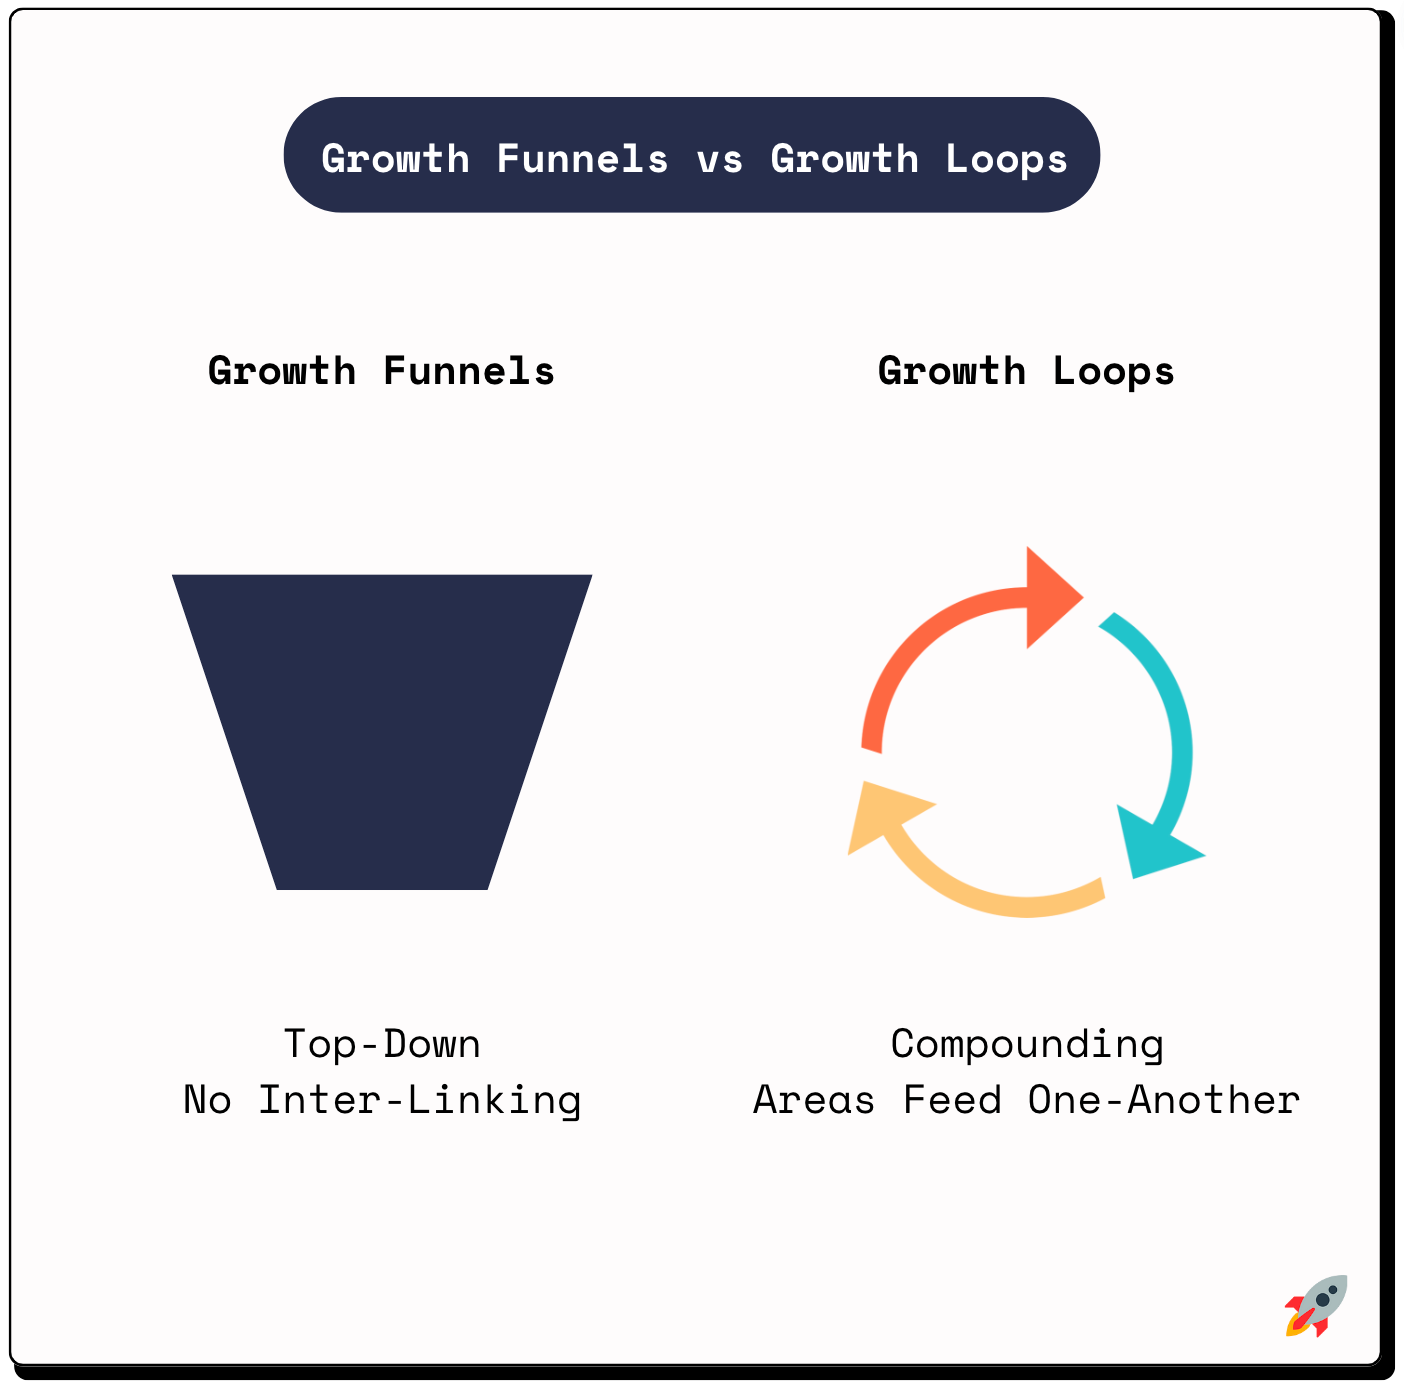 Growth Loops: How The World's Best Brands Build Growth